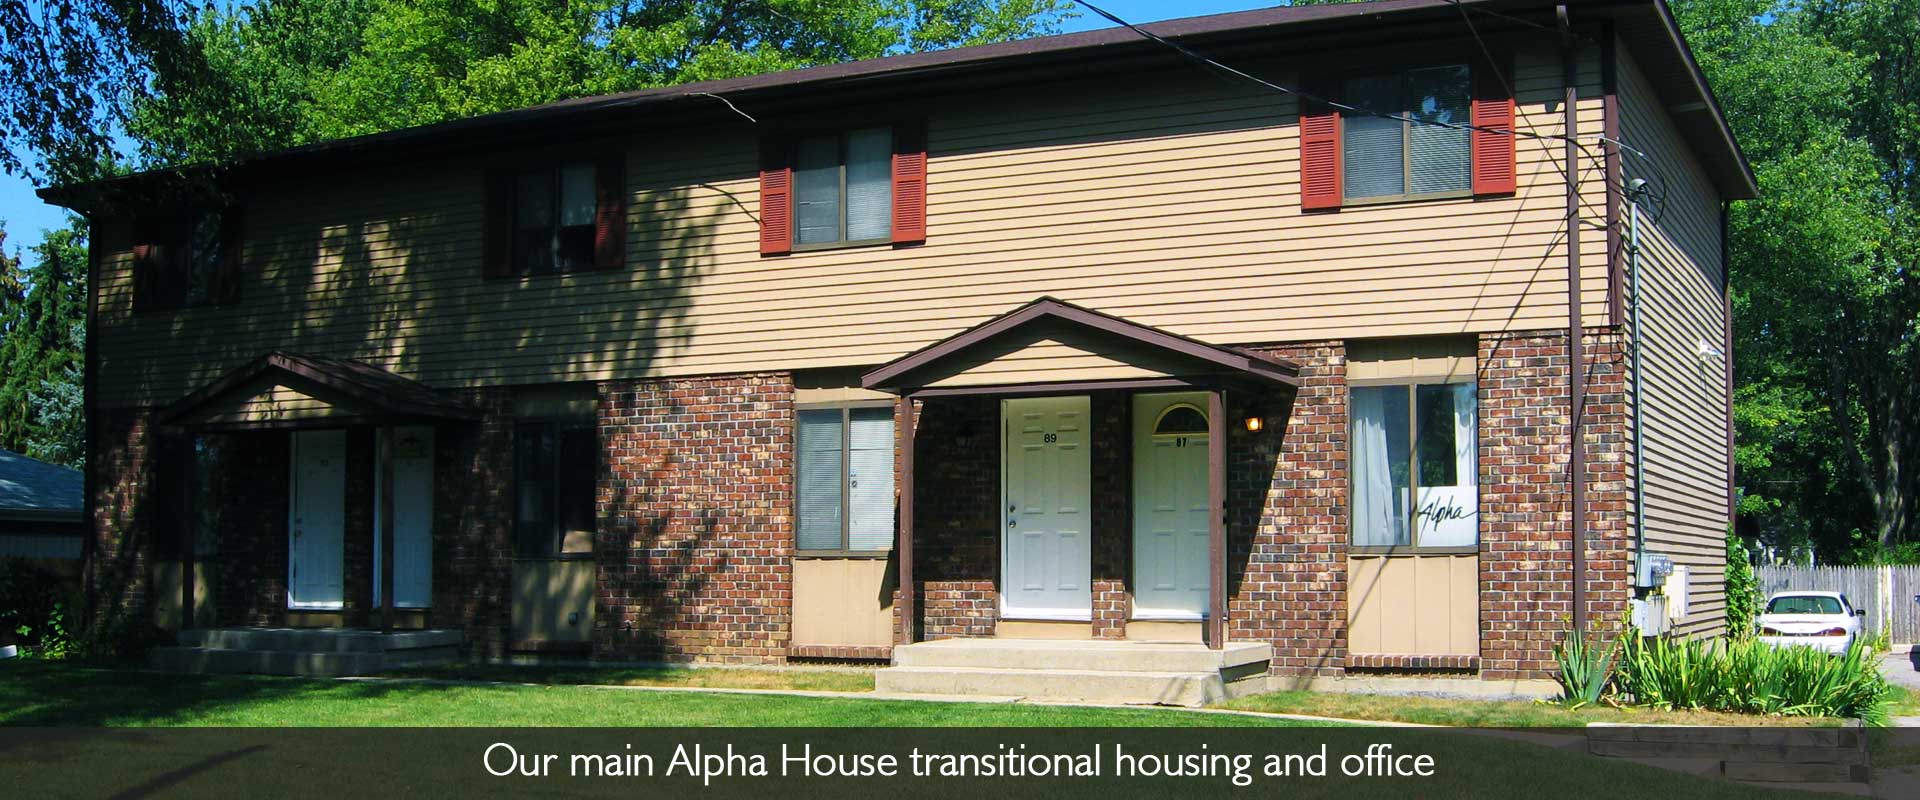 Alpha House transitional housing facility